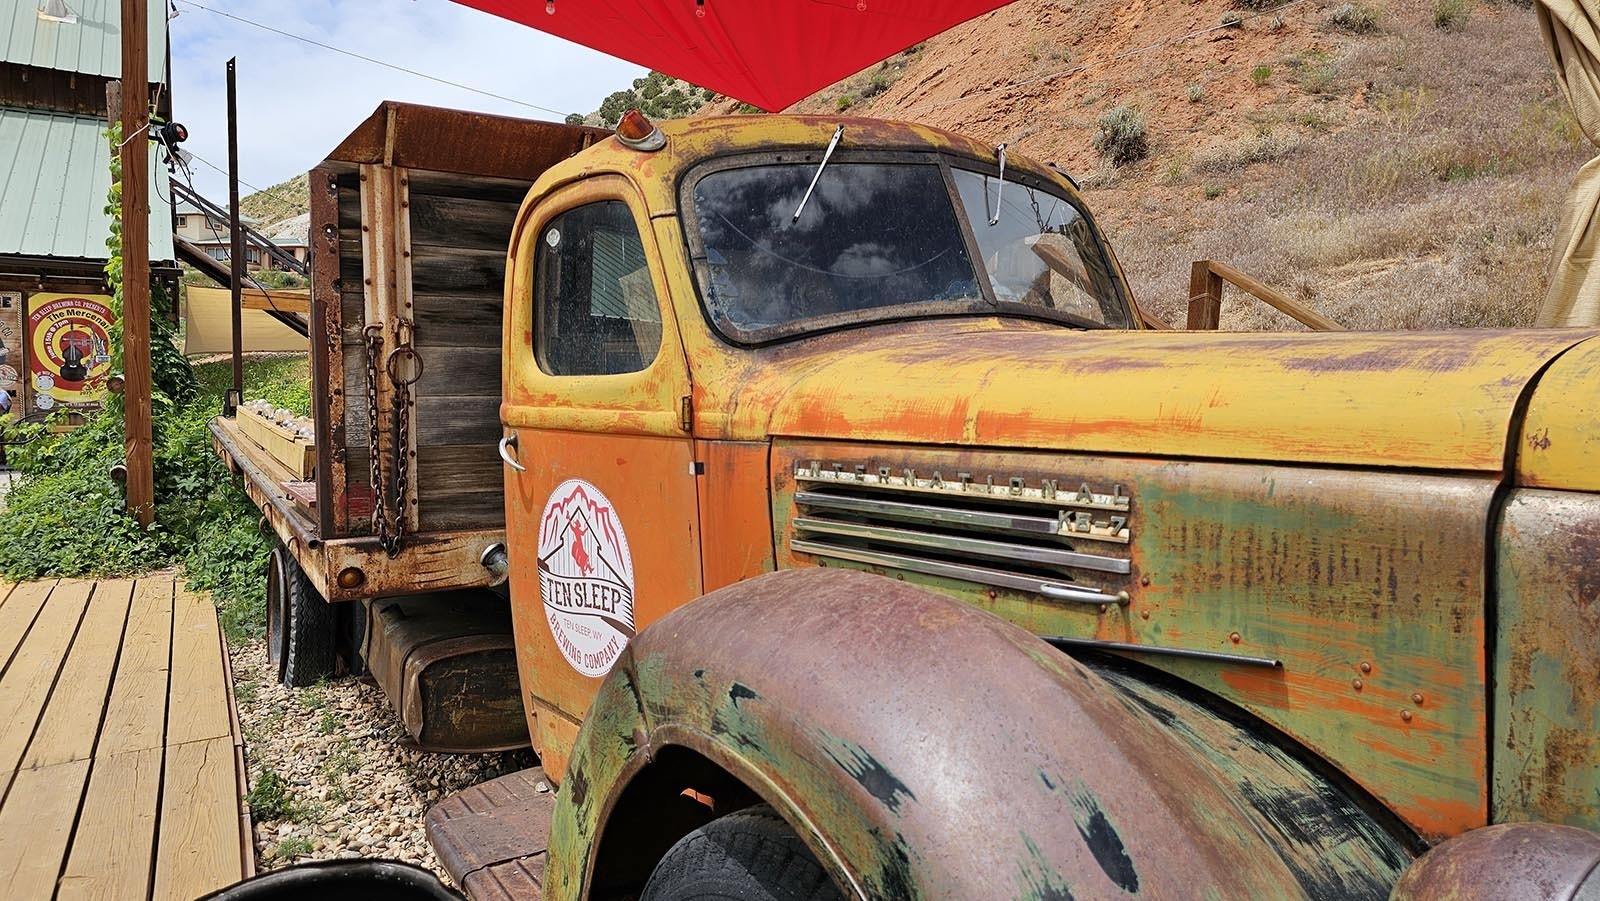 An old truck was used to create a functional stage, by building a new flatbed on the back.